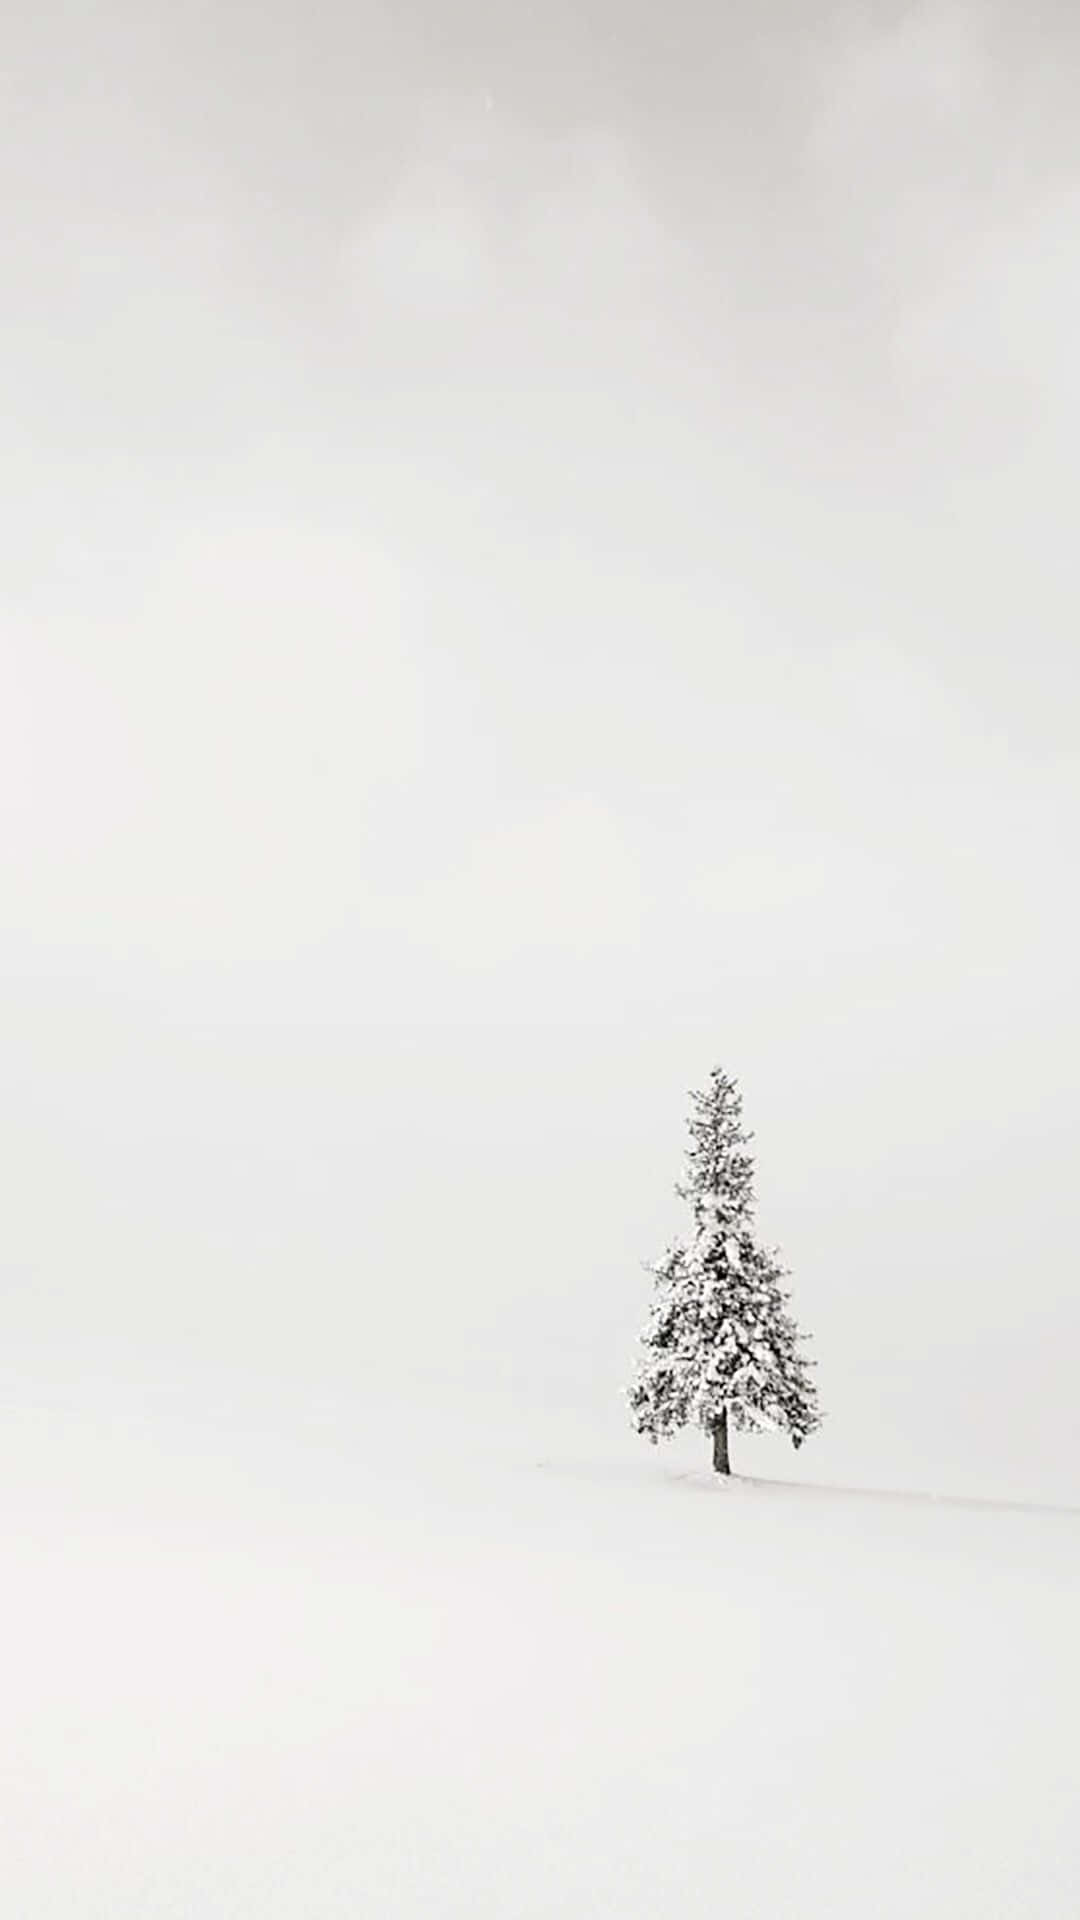 A Single Tree In A Snow Covered Field Wallpaper